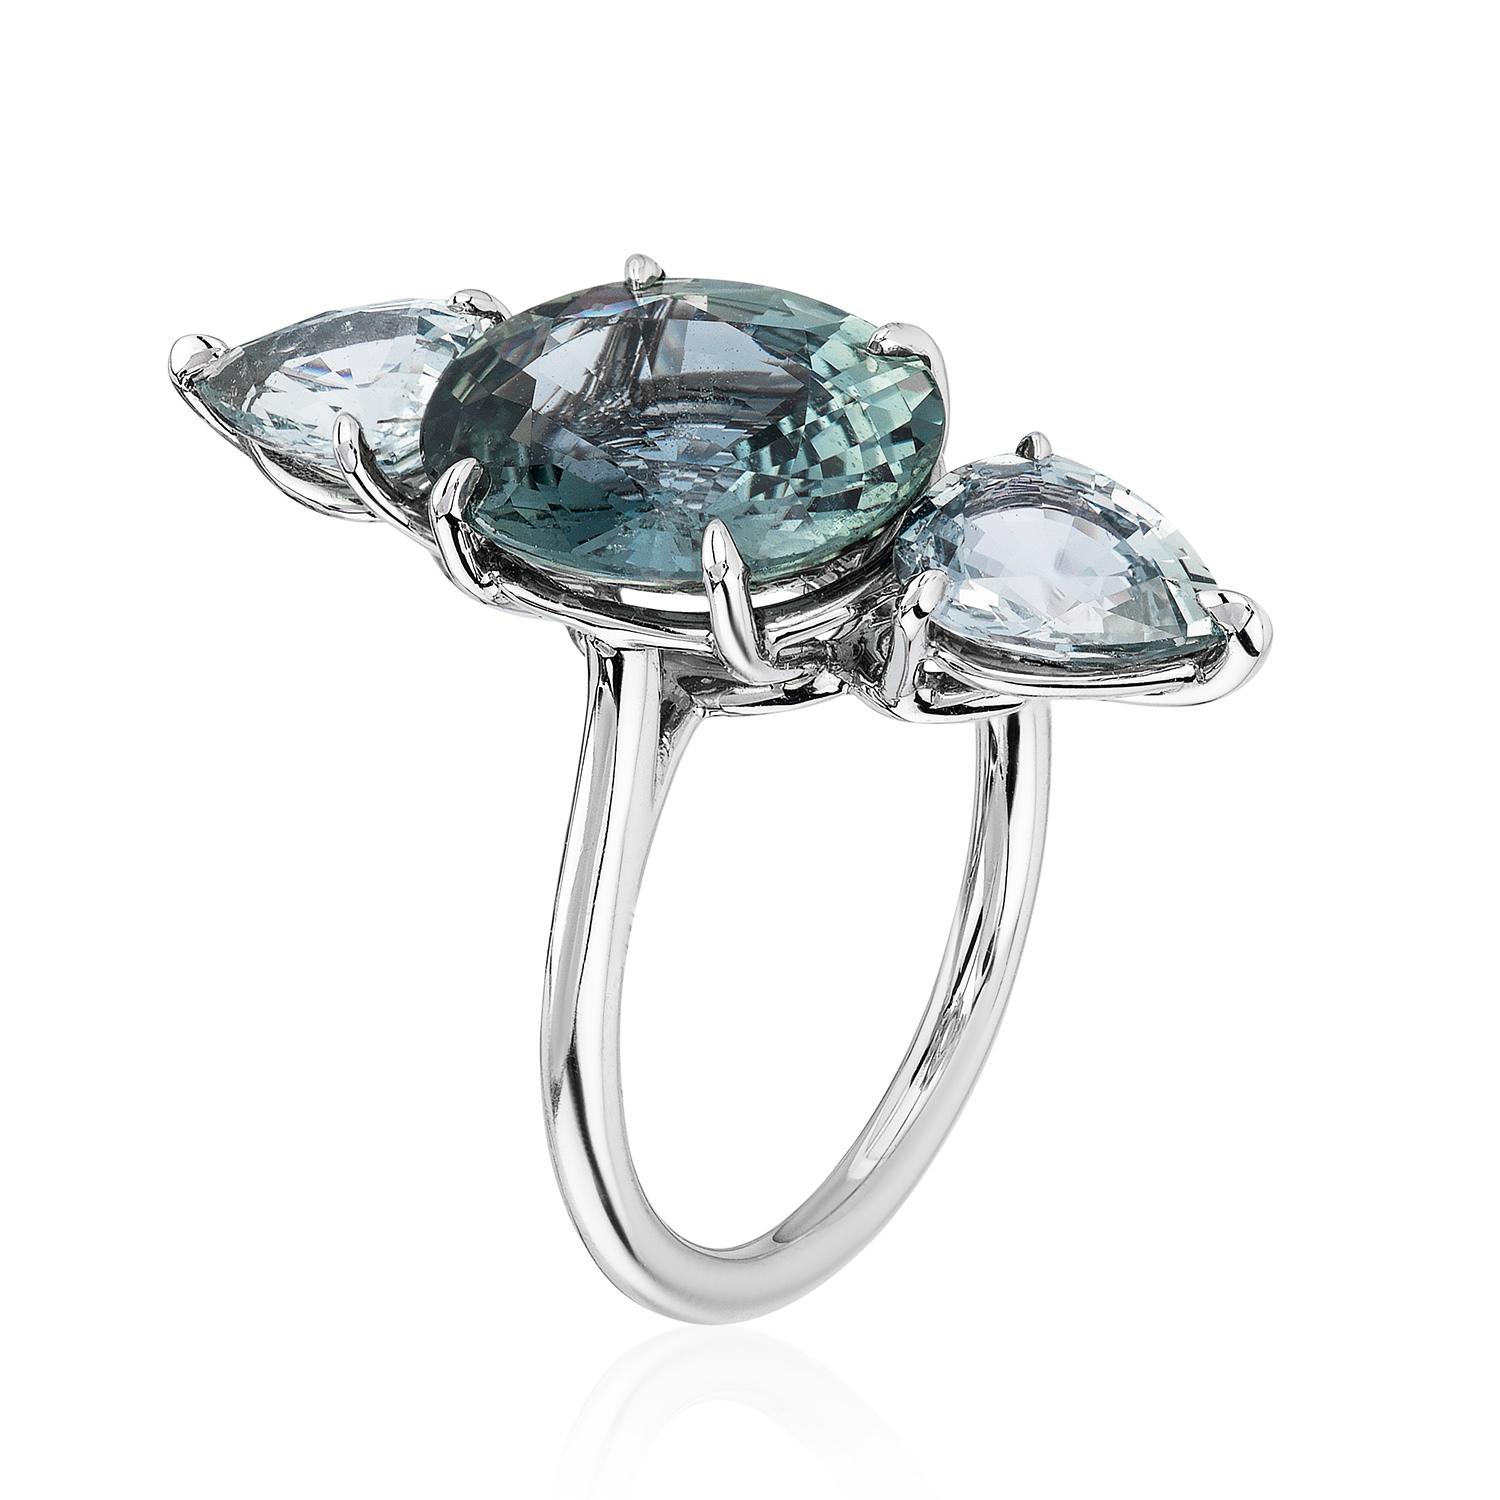 A Platinum vertical ring centered upon a 5.19 carat natural unheated oval green sapphire, certified by C. Dunaigre Consulting, set with two natural unheated pear-shaped green sapphires weighing 2.41 carats total.

Finding the right melange of colors